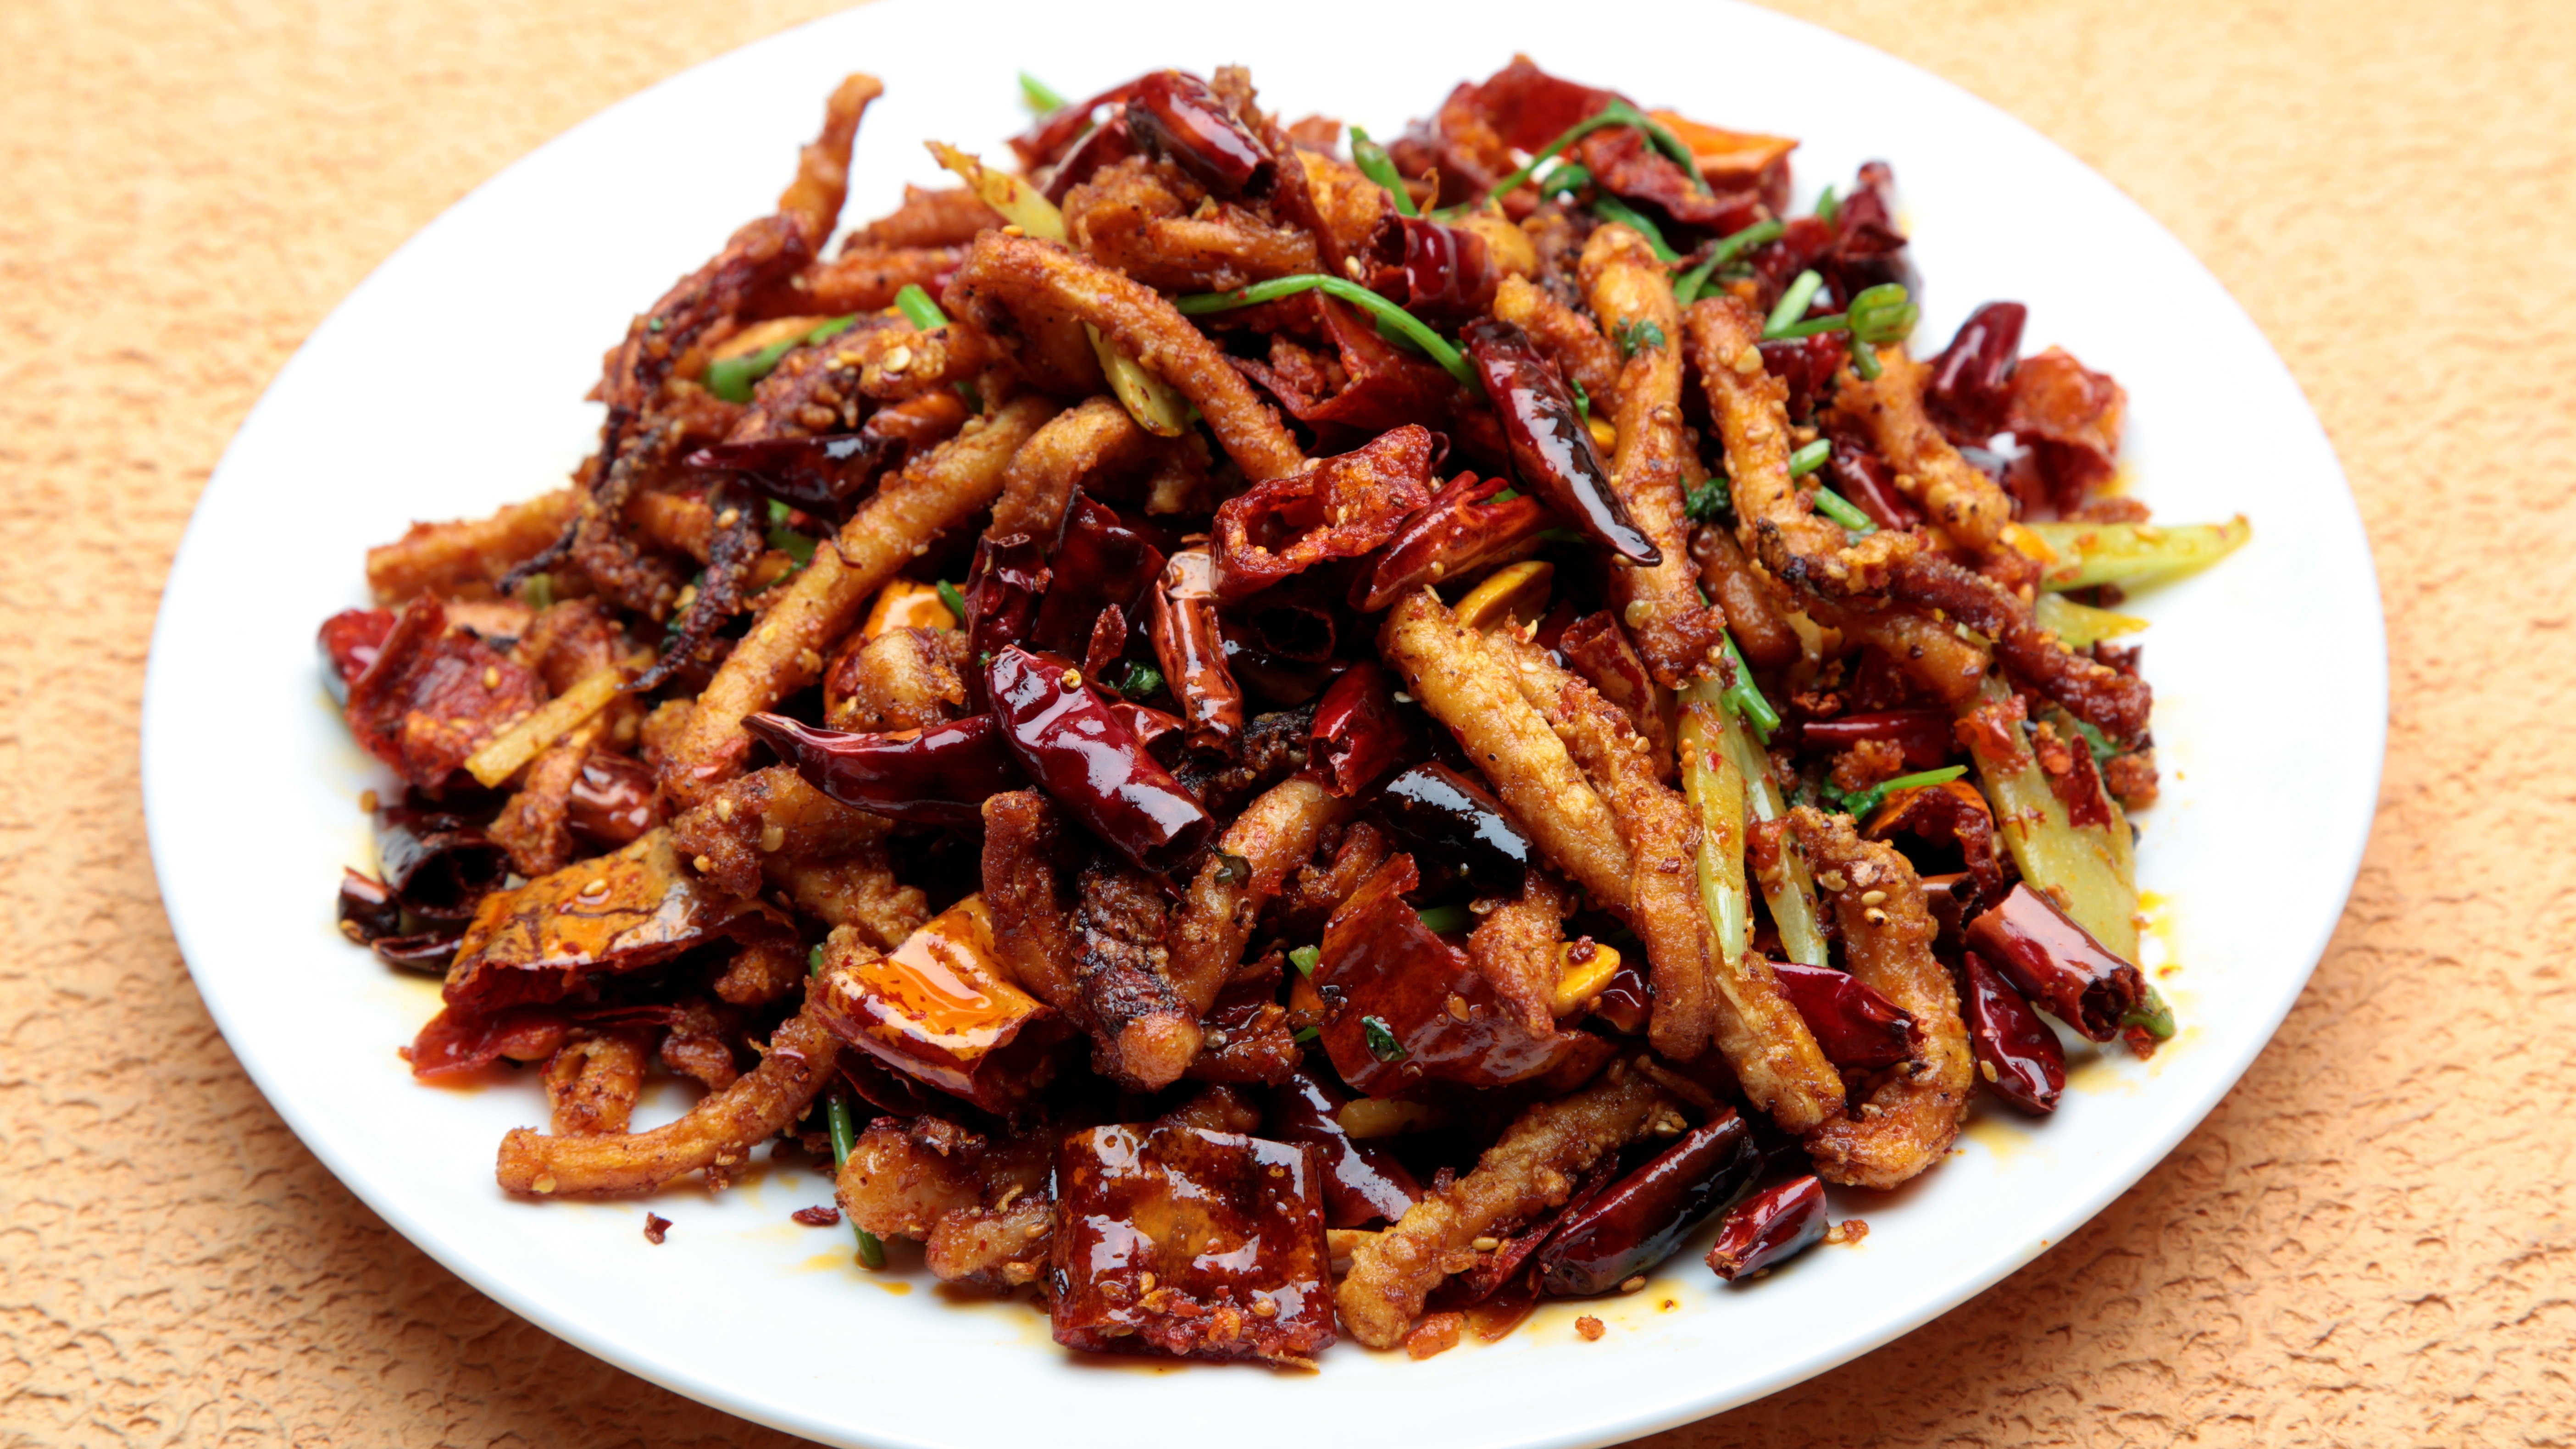 Deep Fried Squid with Spicy Sauce 干煸鱿鱼